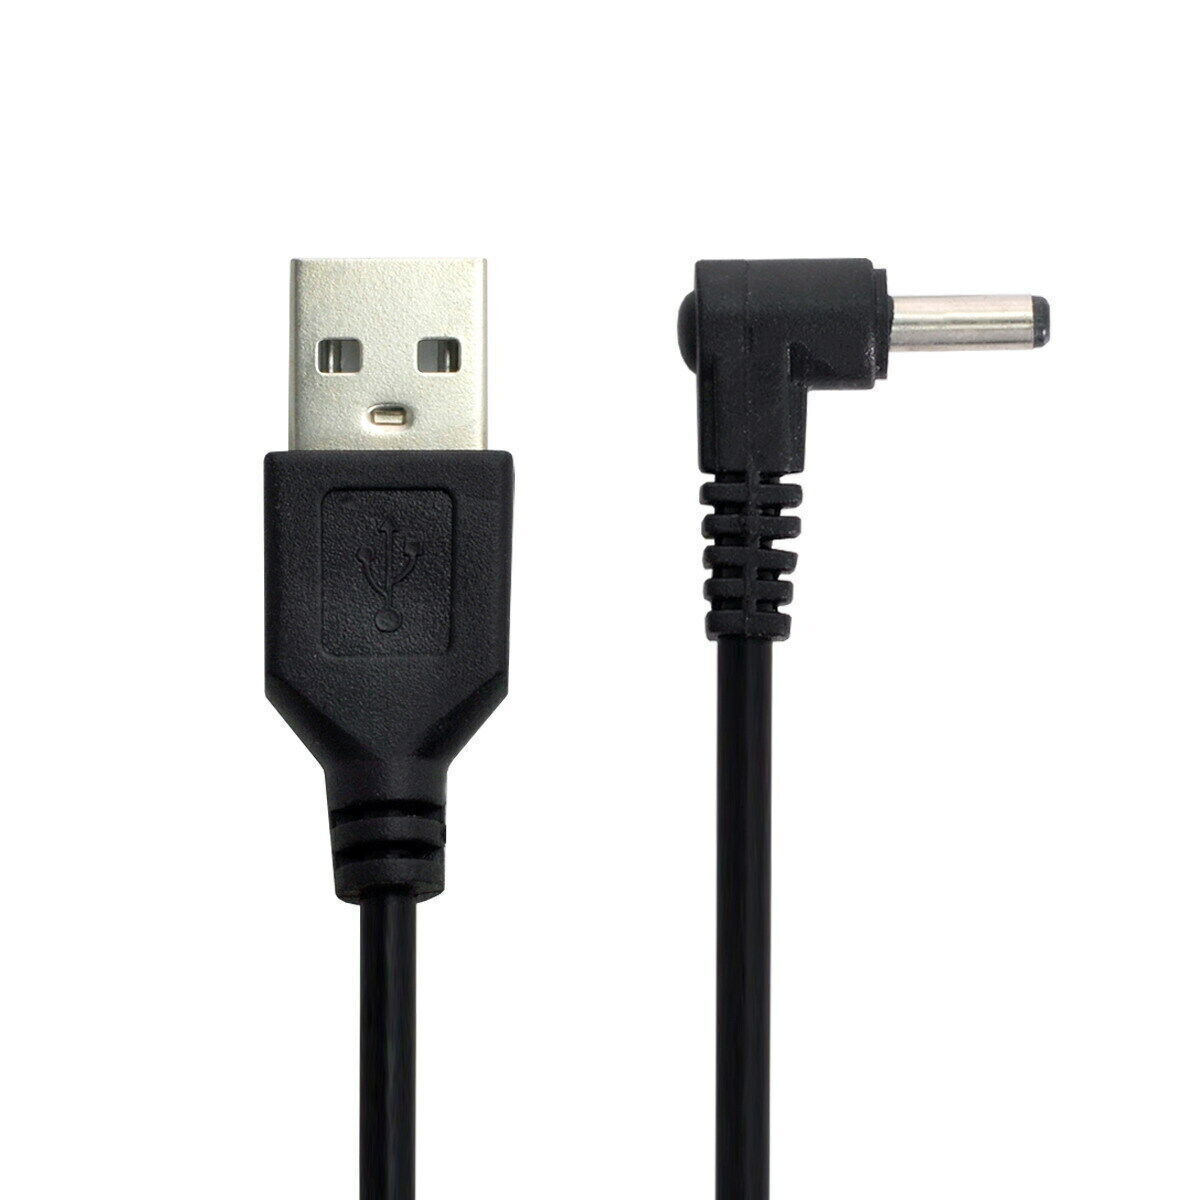 USB2.0 Male to Right Angled 90 D 3.5mm 1.35mm DC Power Plug Barrel 5v Cable